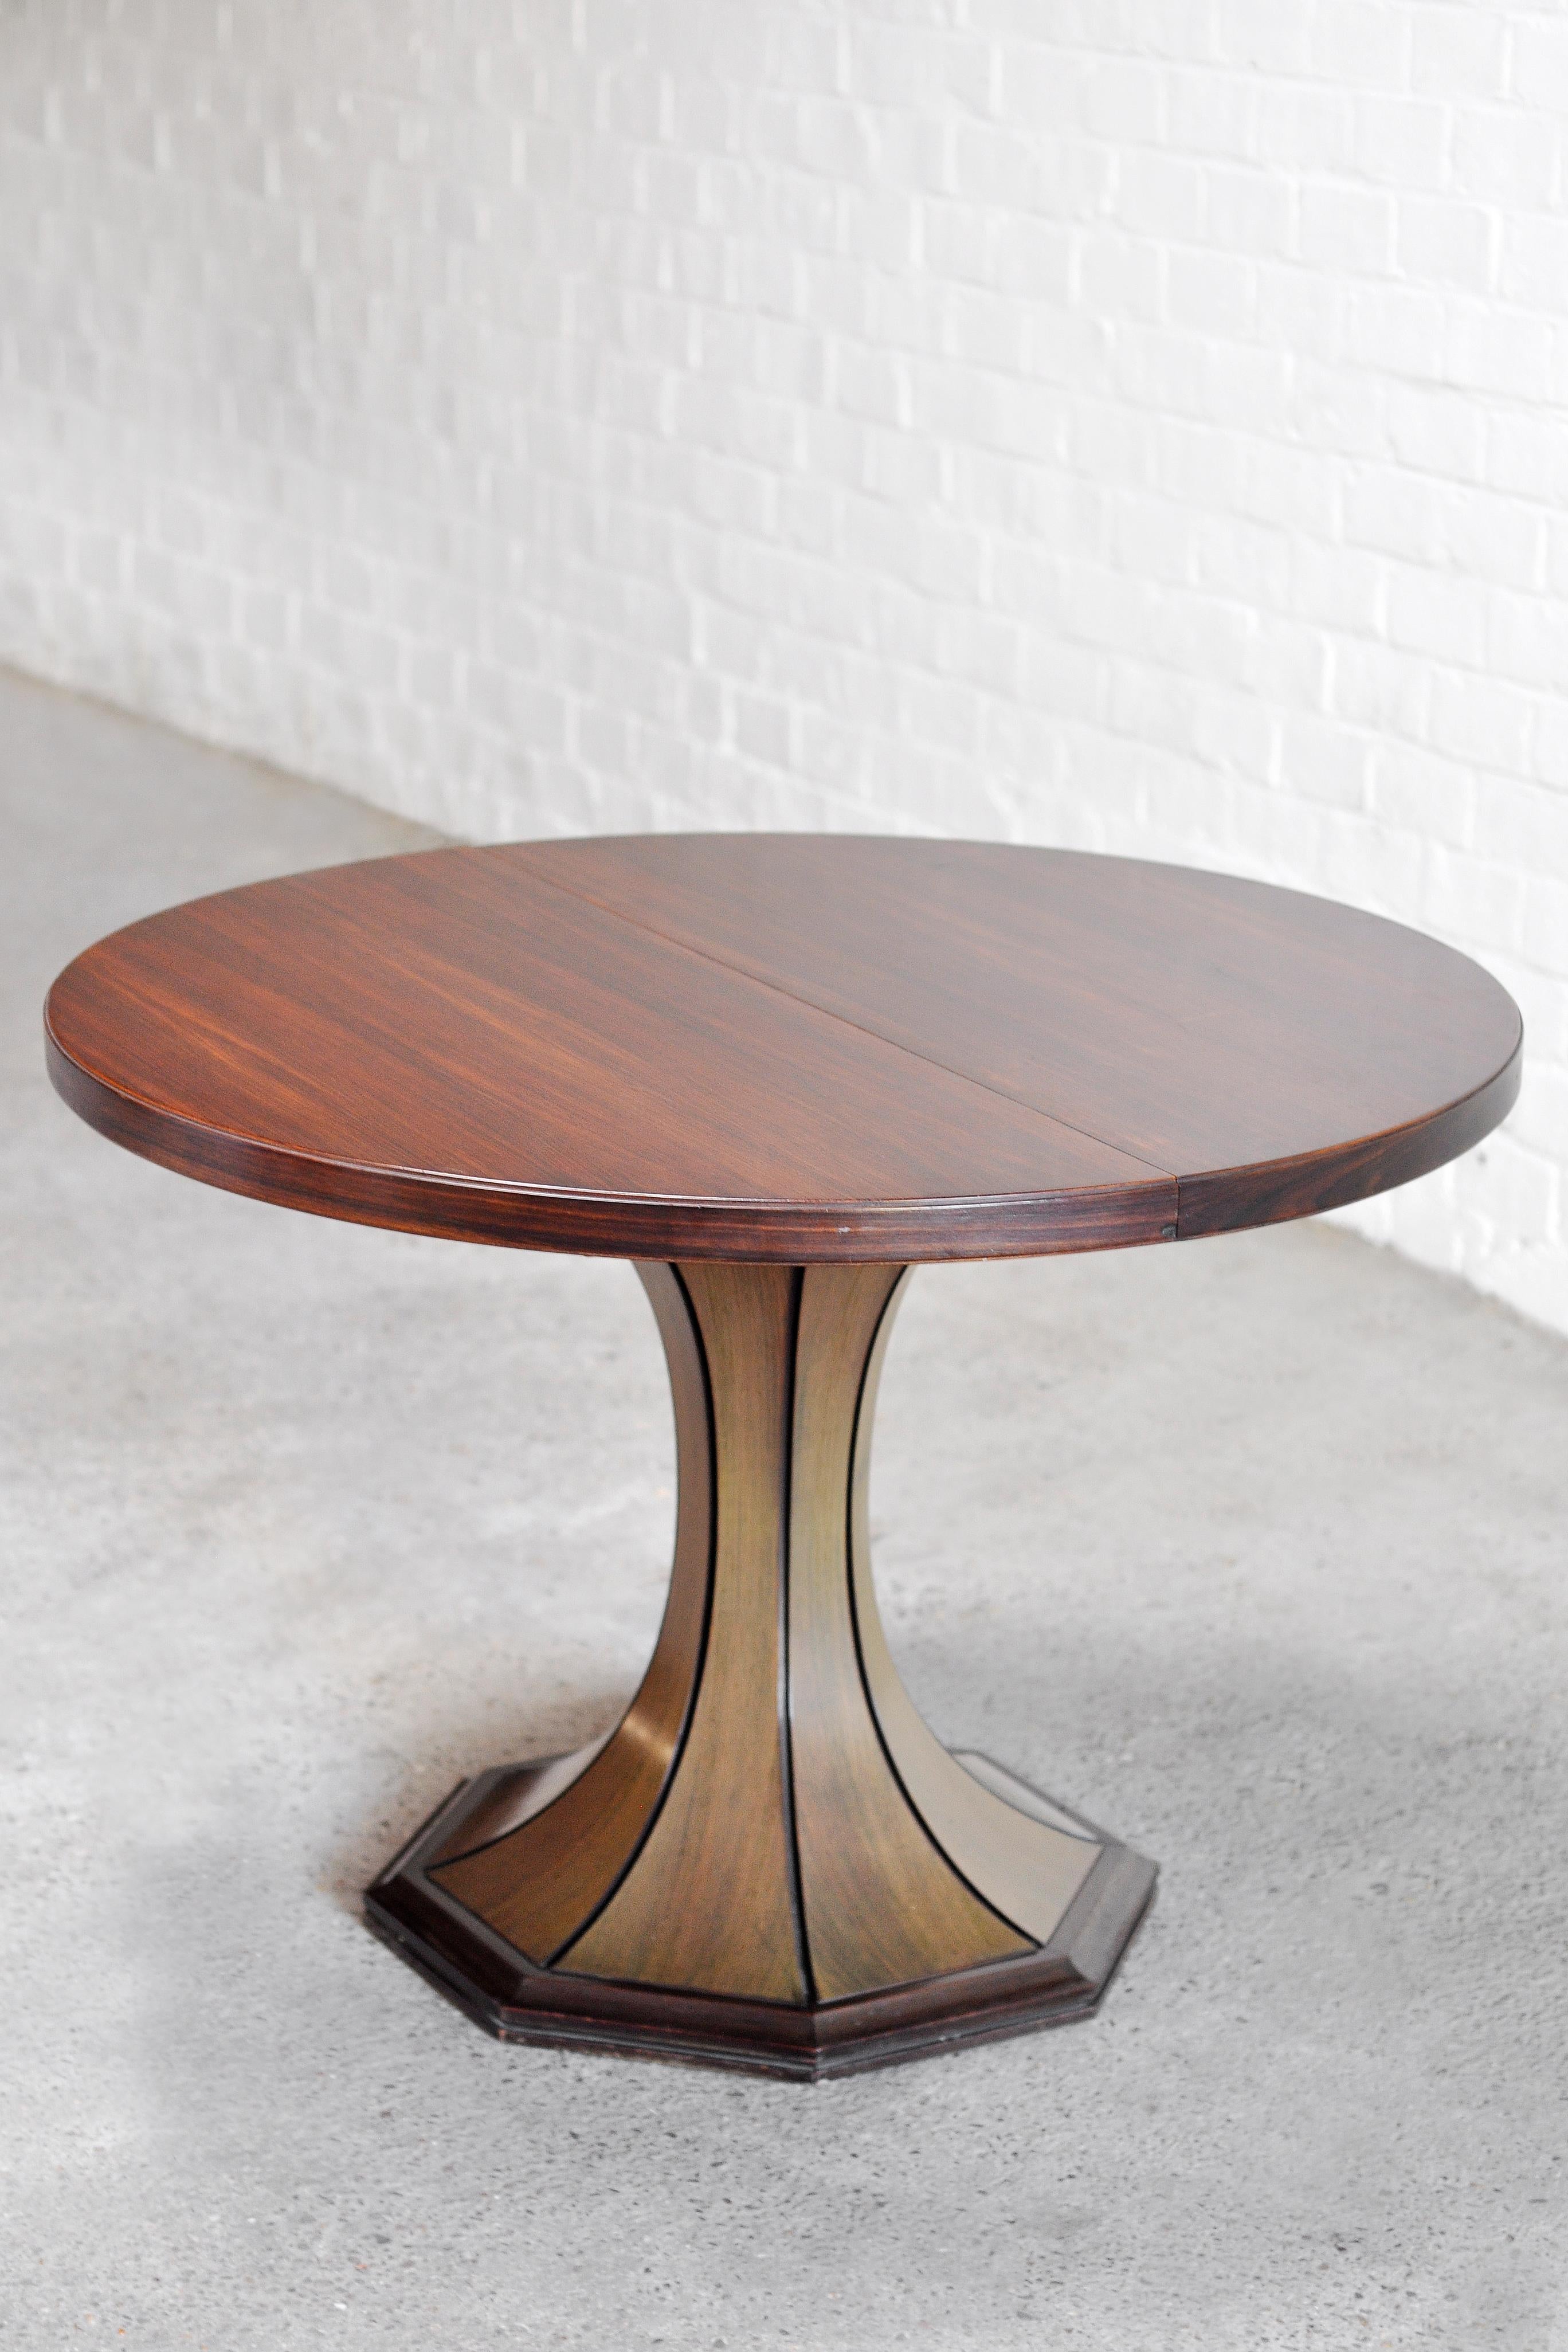 Mid-Century Modern Round Extendable Wooden Dining Table Attributed to Carlo de Carli, Italy 1960s